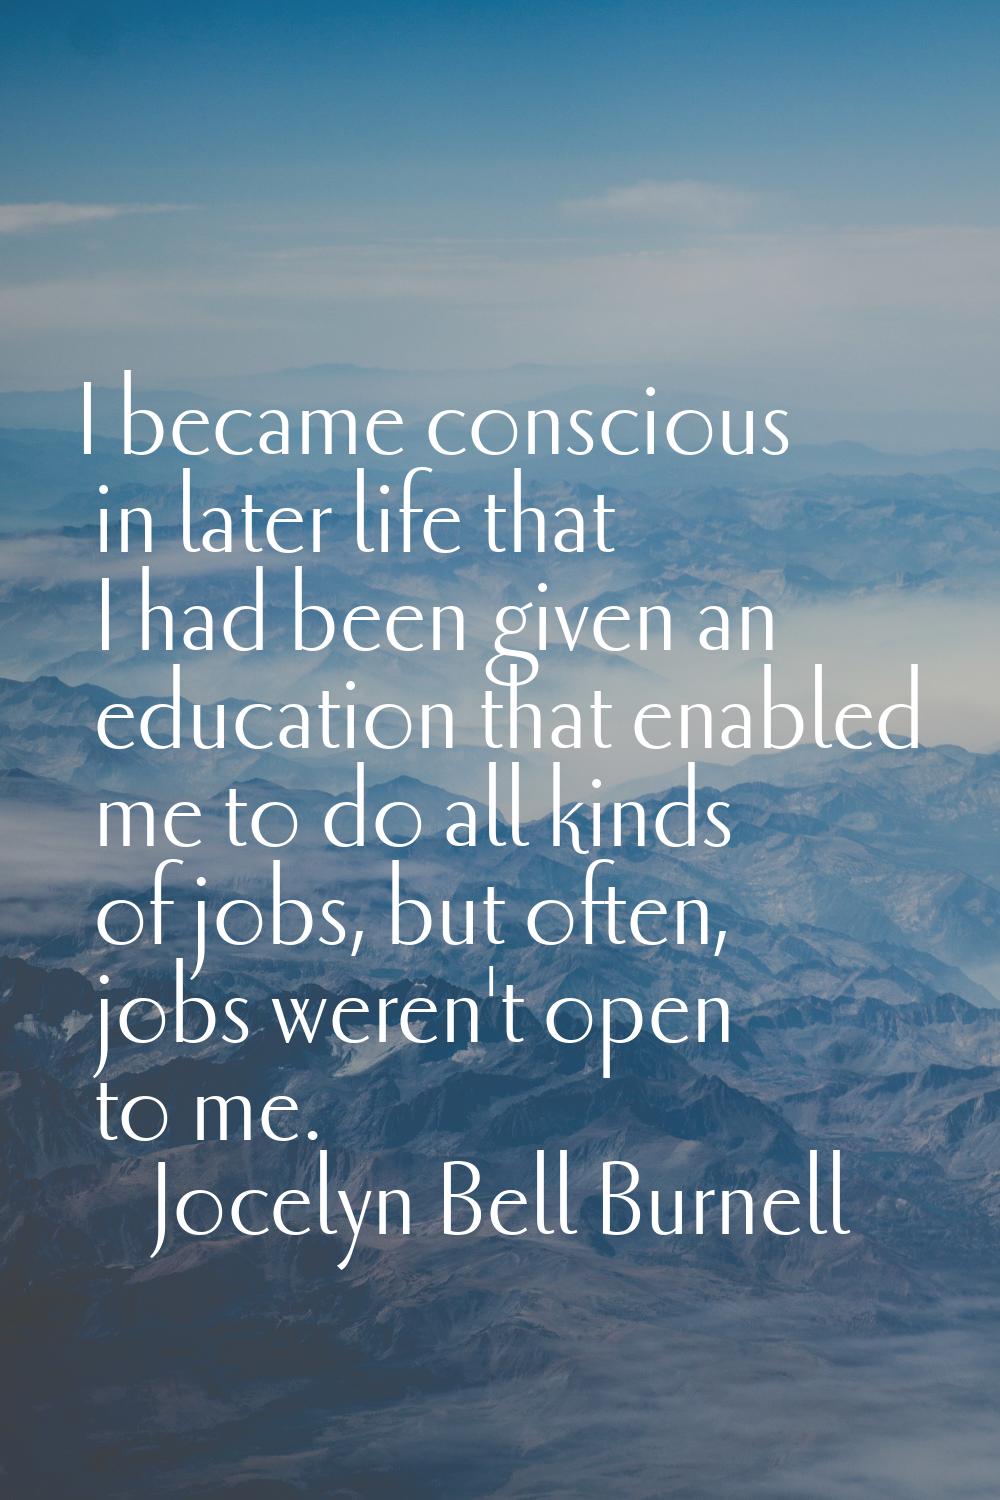 I became conscious in later life that I had been given an education that enabled me to do all kinds